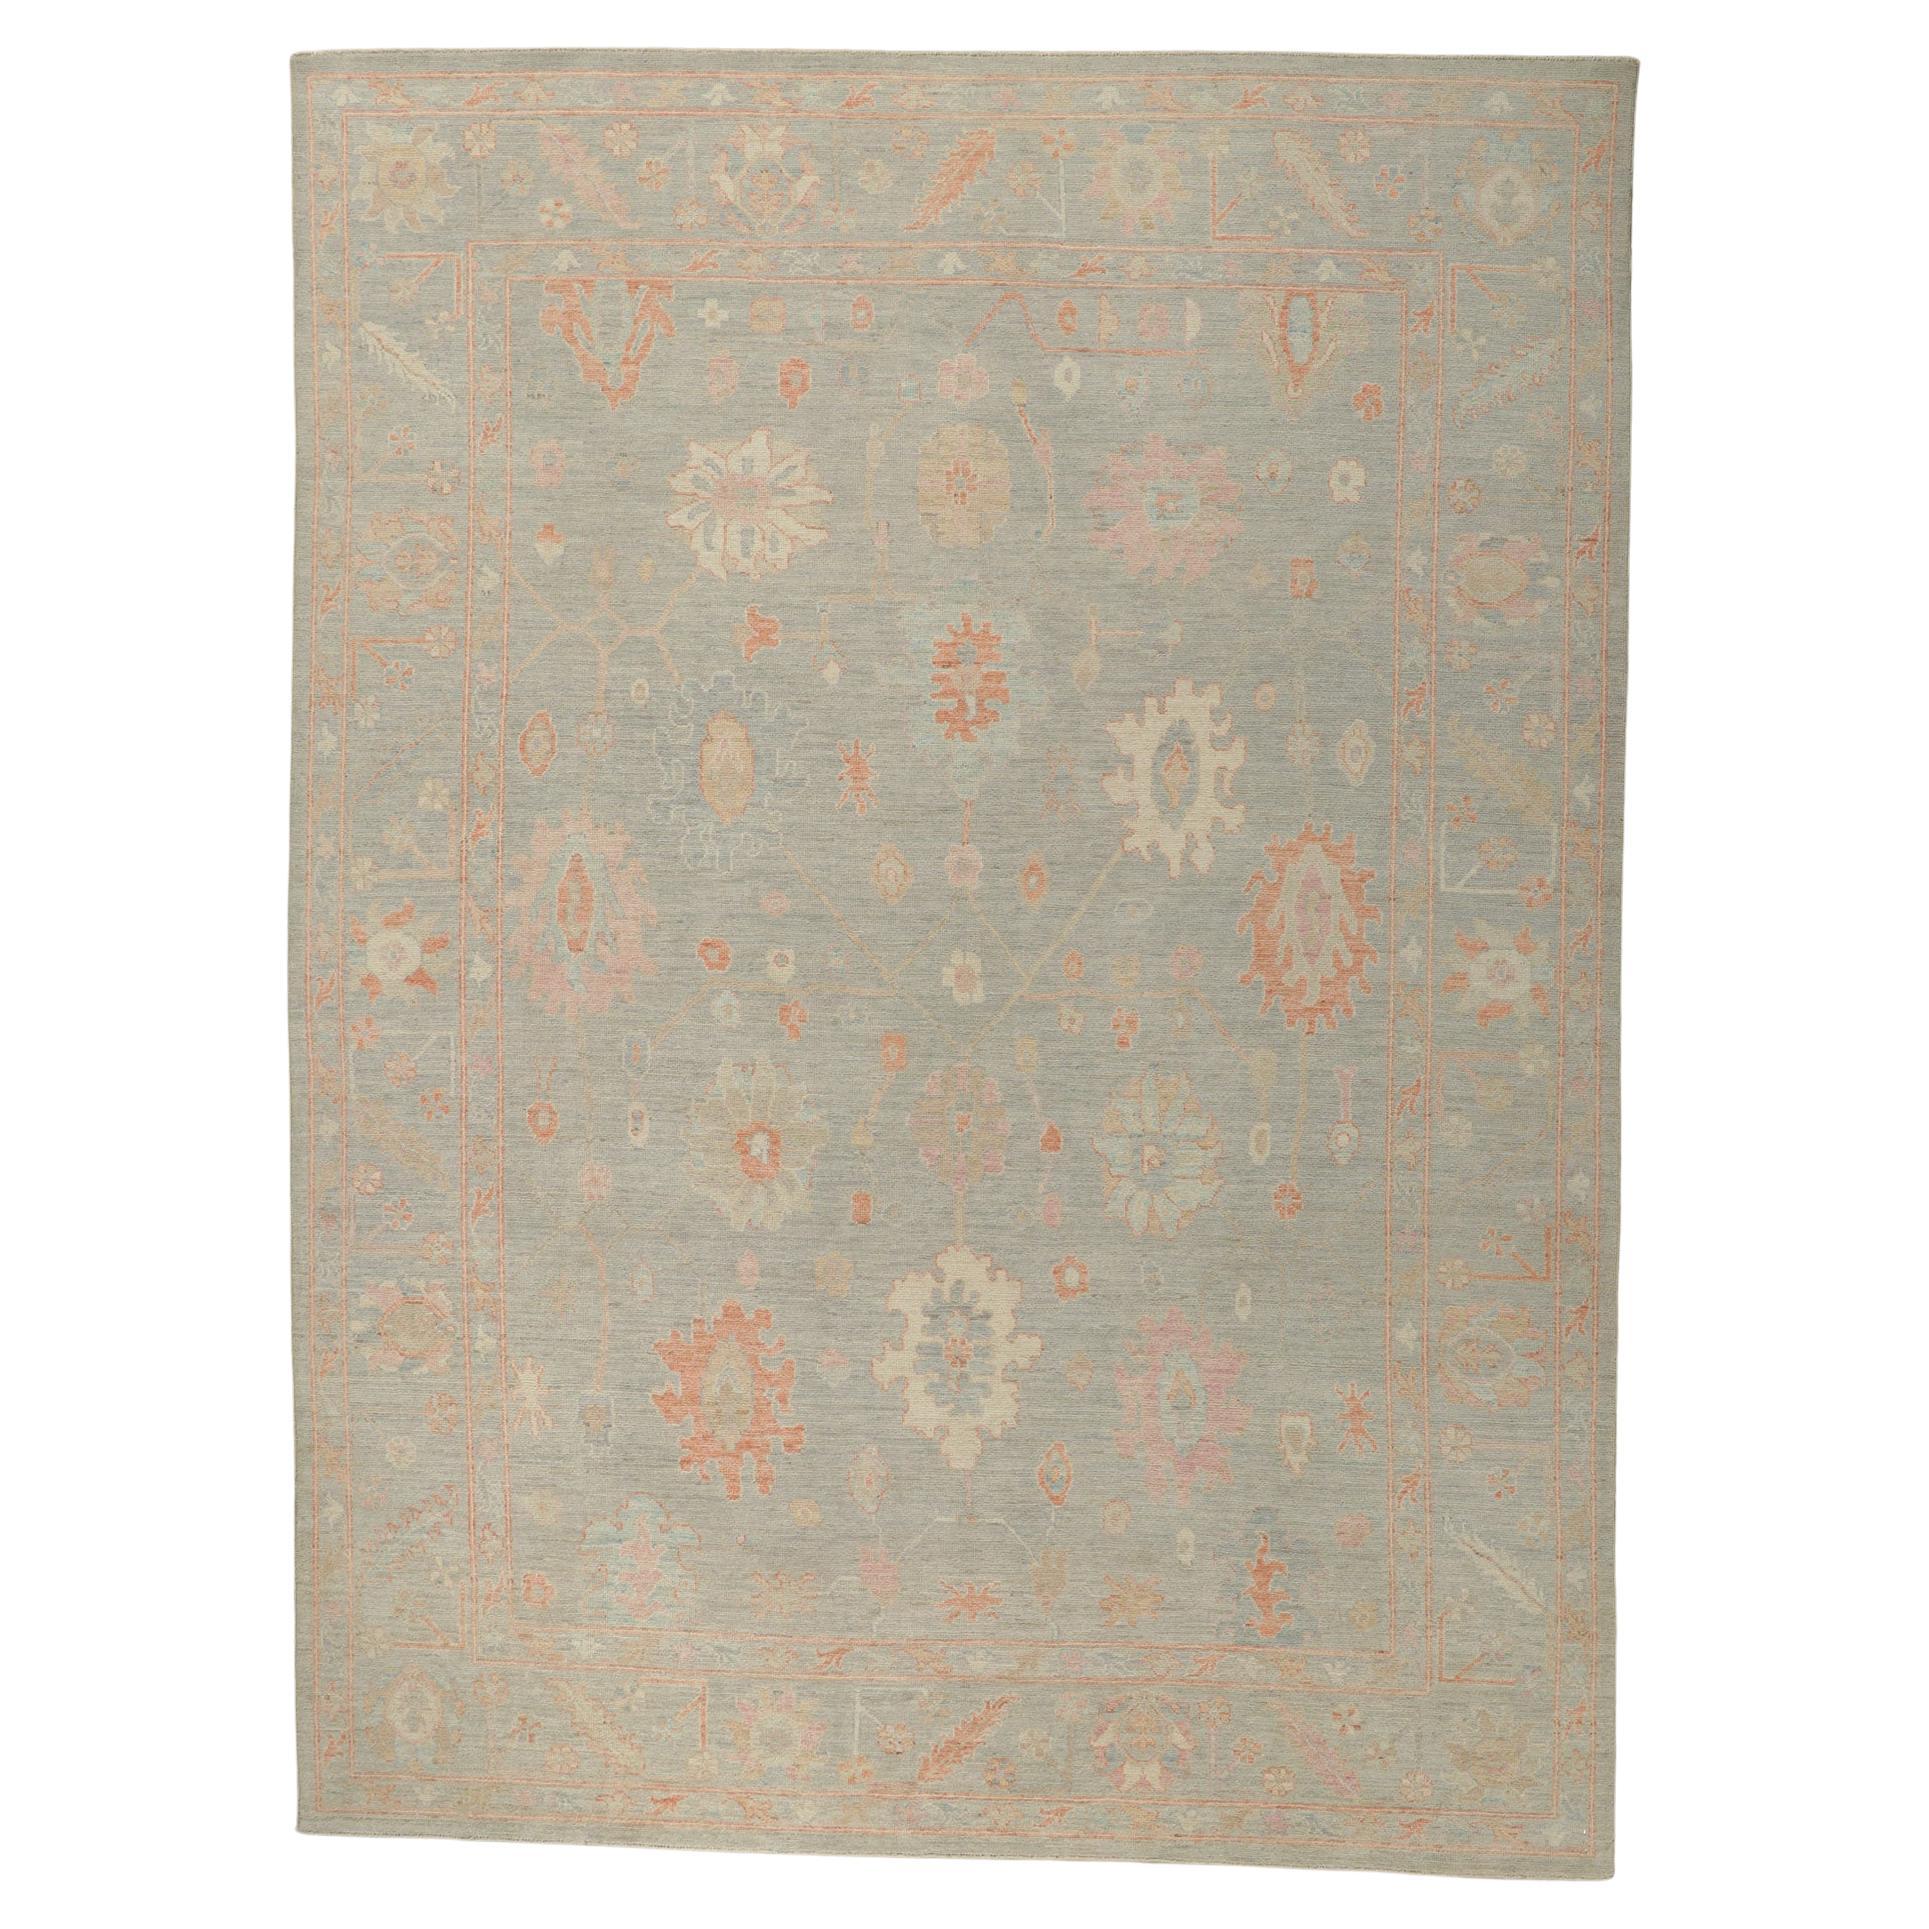 Vintage-Inspired Muted Oushak Rug, Modern Style Meets Nostalgic Charm For Sale